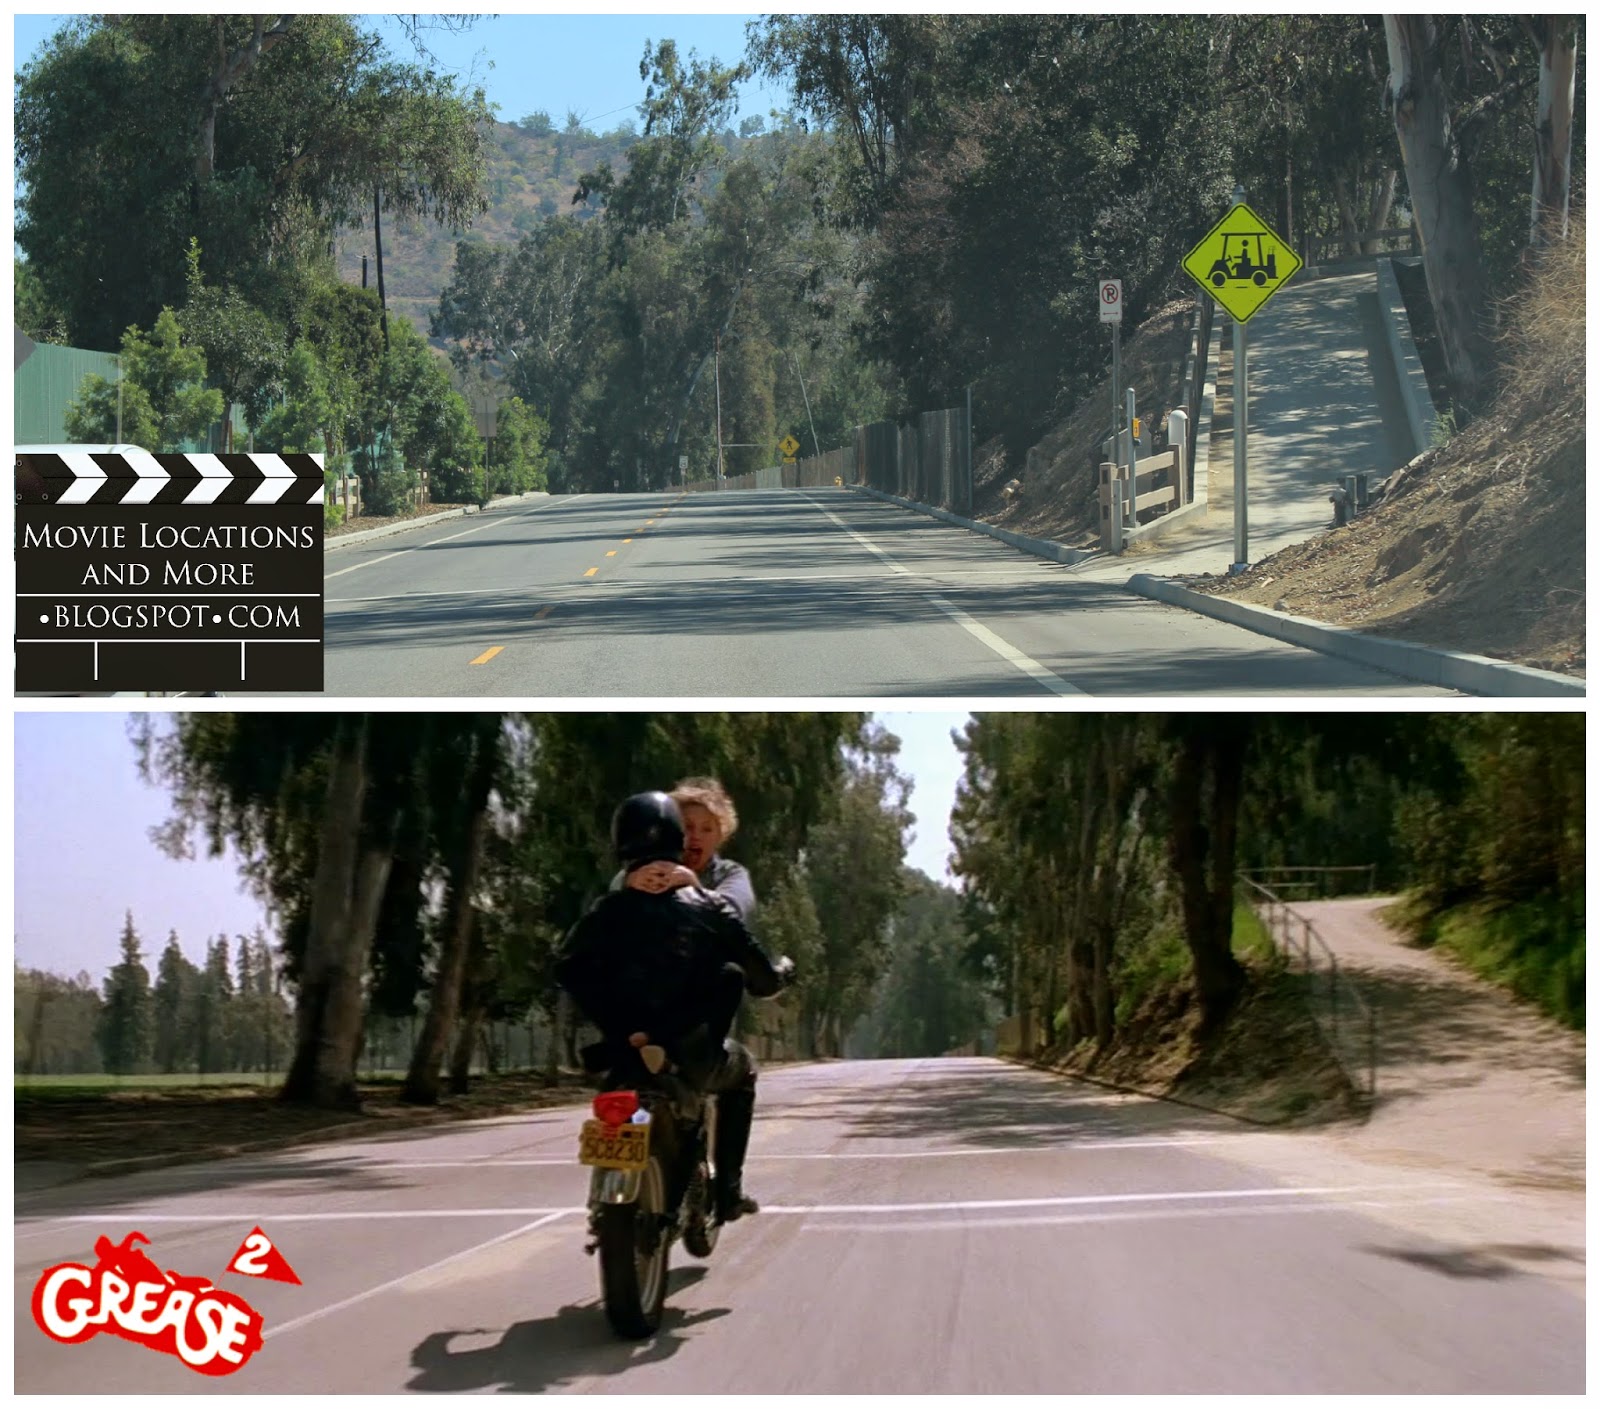 Grease 2 Movie Location Comparison Shot of Road where Stephanie goes for a ride with Michael in Grease 2.
